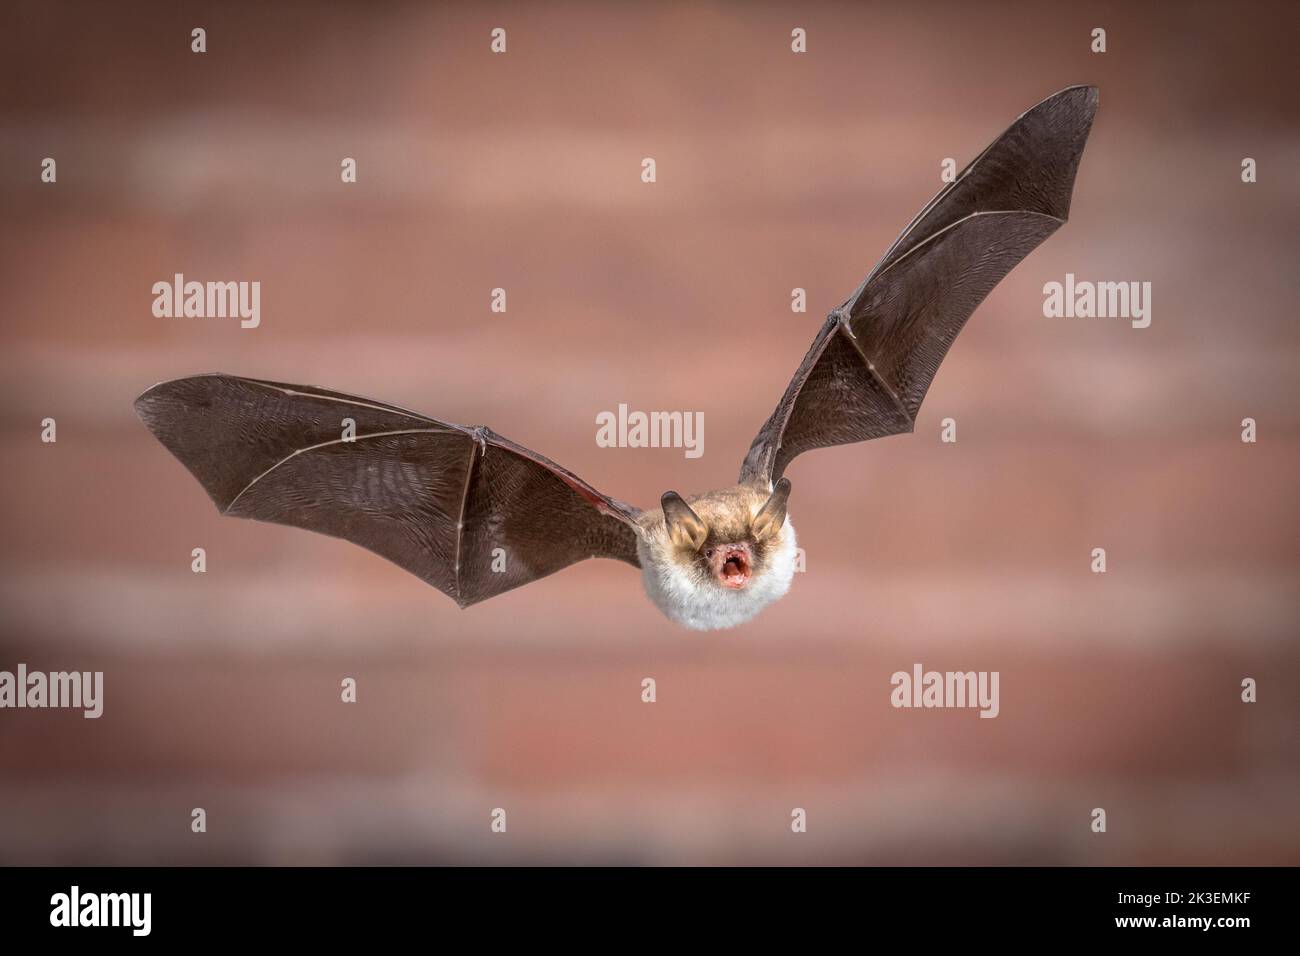 Flying Natterer's bat (Myotis nattereri) action shot of hunting animal on brick background. This species is medium sized with distictive white belly, Stock Photo